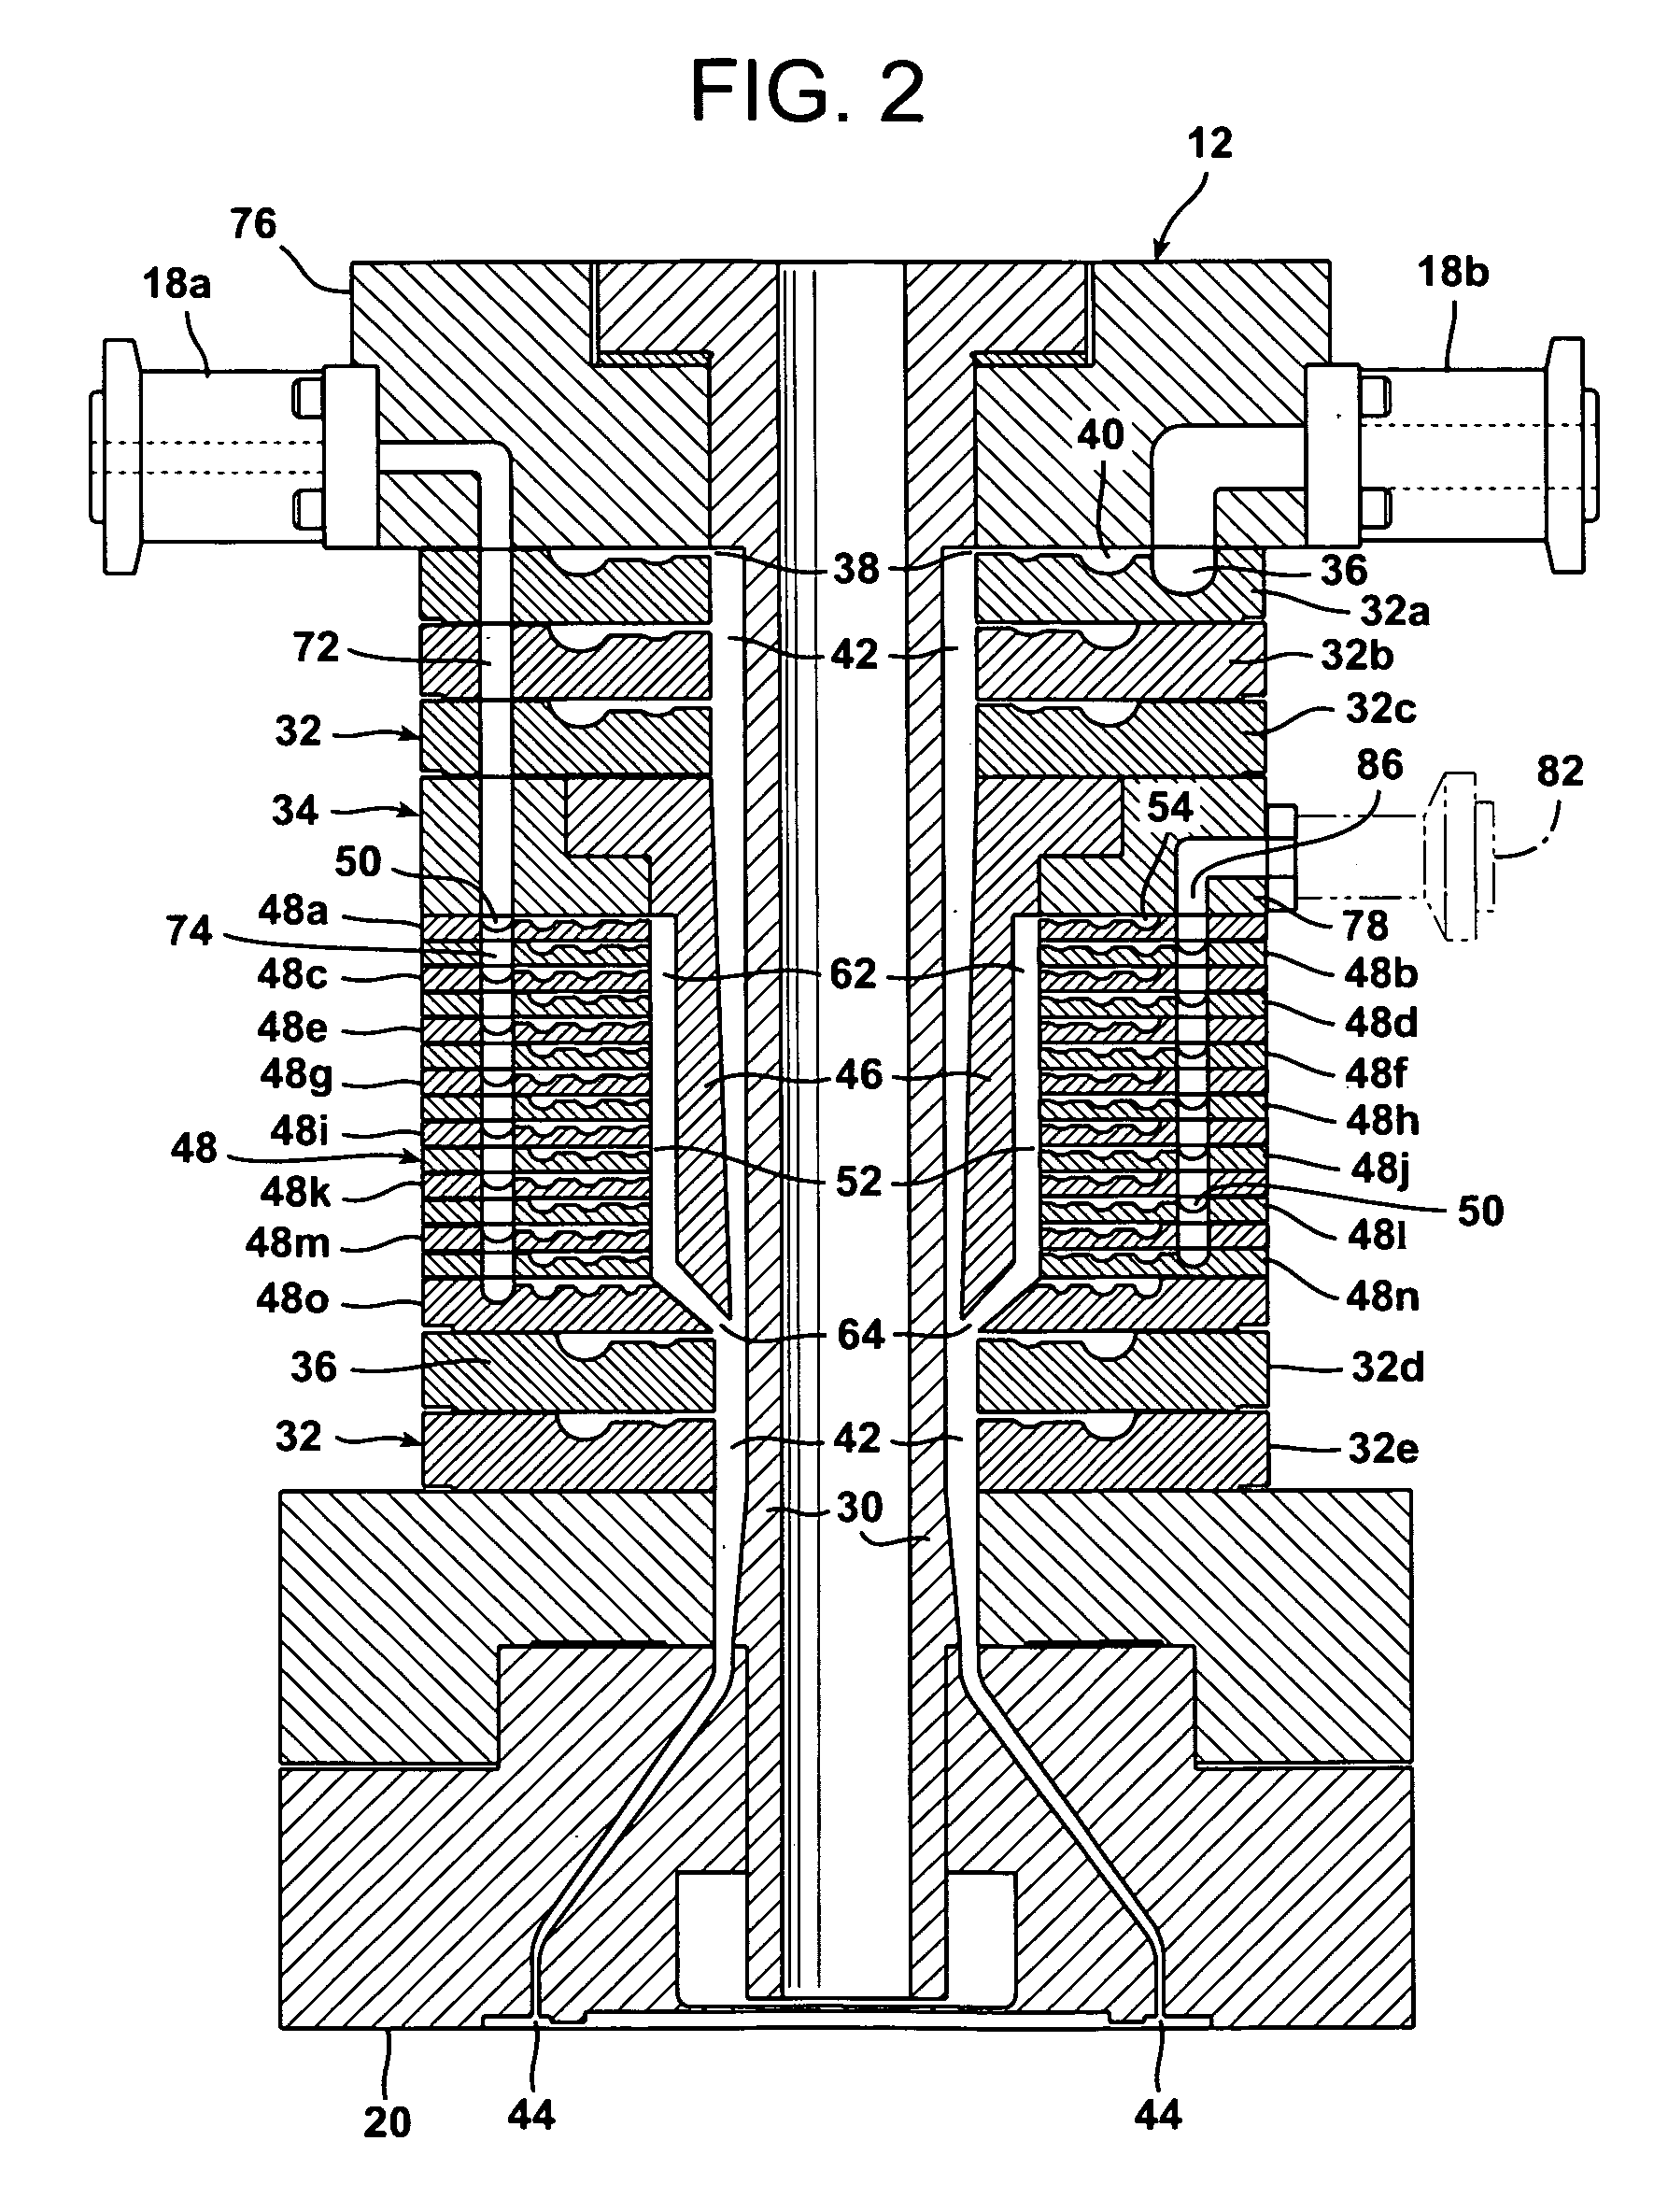 Multilayer, Heat-Shrinkable Film Comprising a Plurality of Microlayers